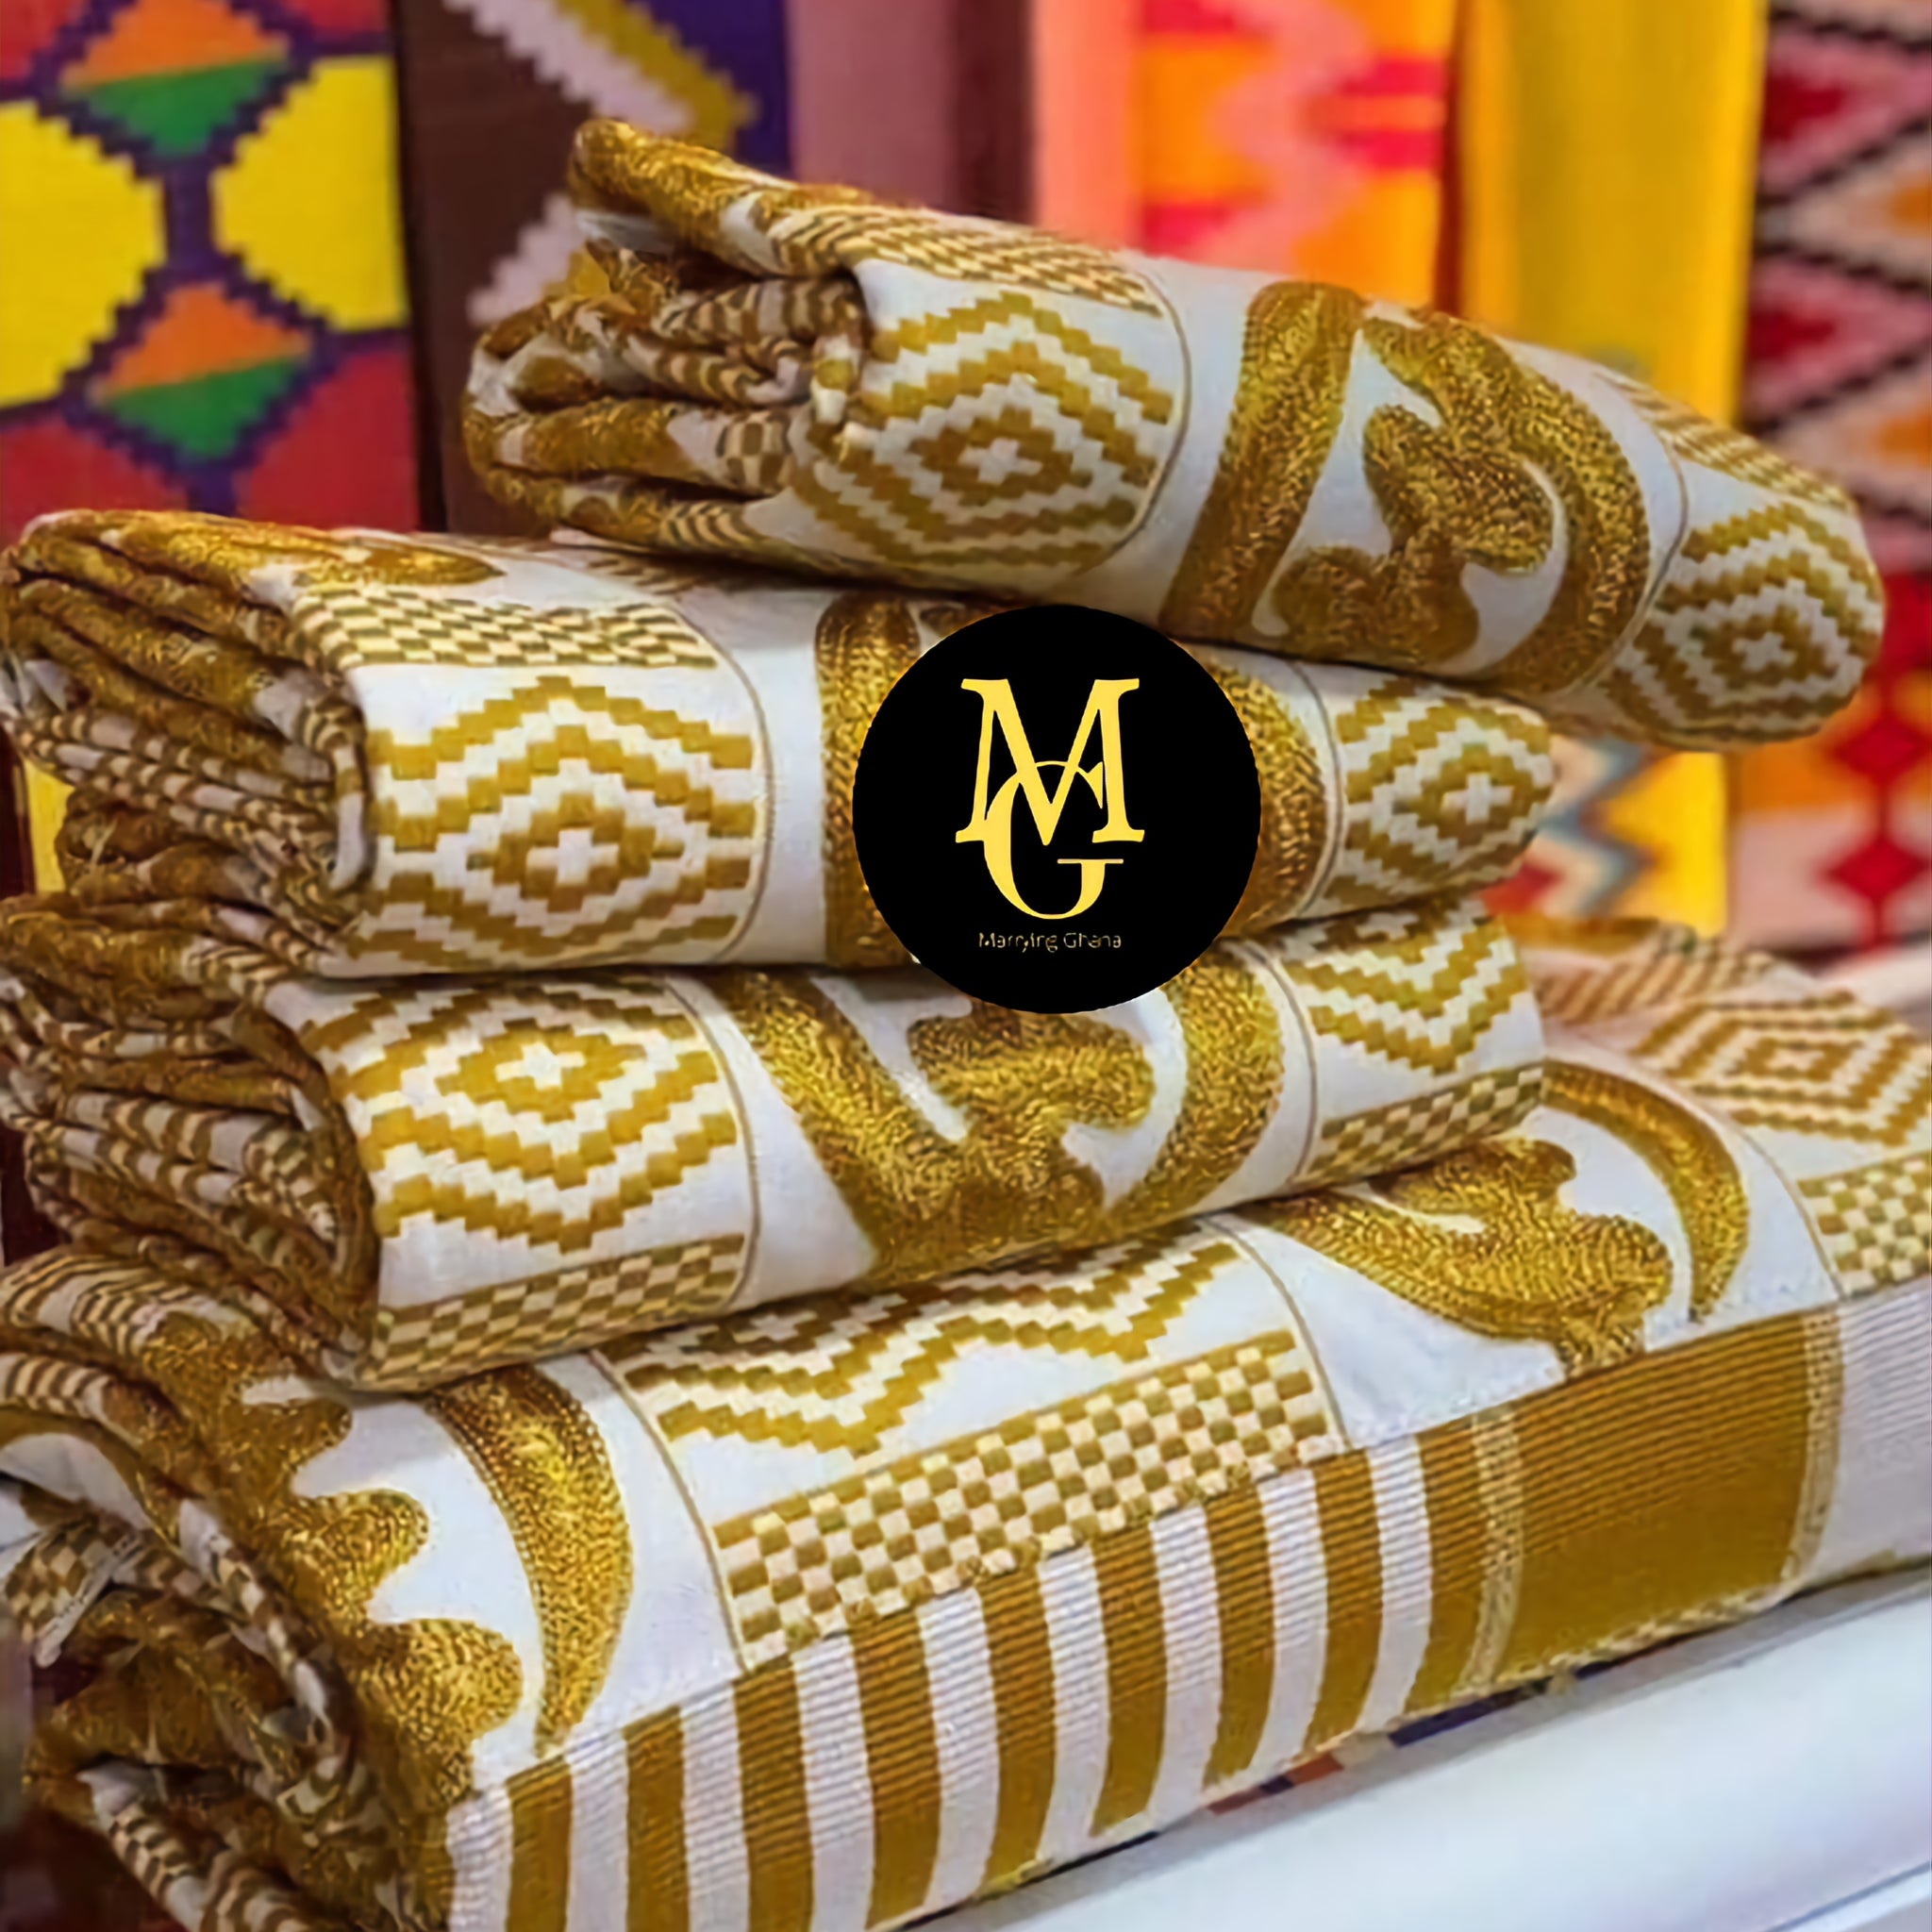 MG Authentic Hand Weaved Kente Cloth A2718